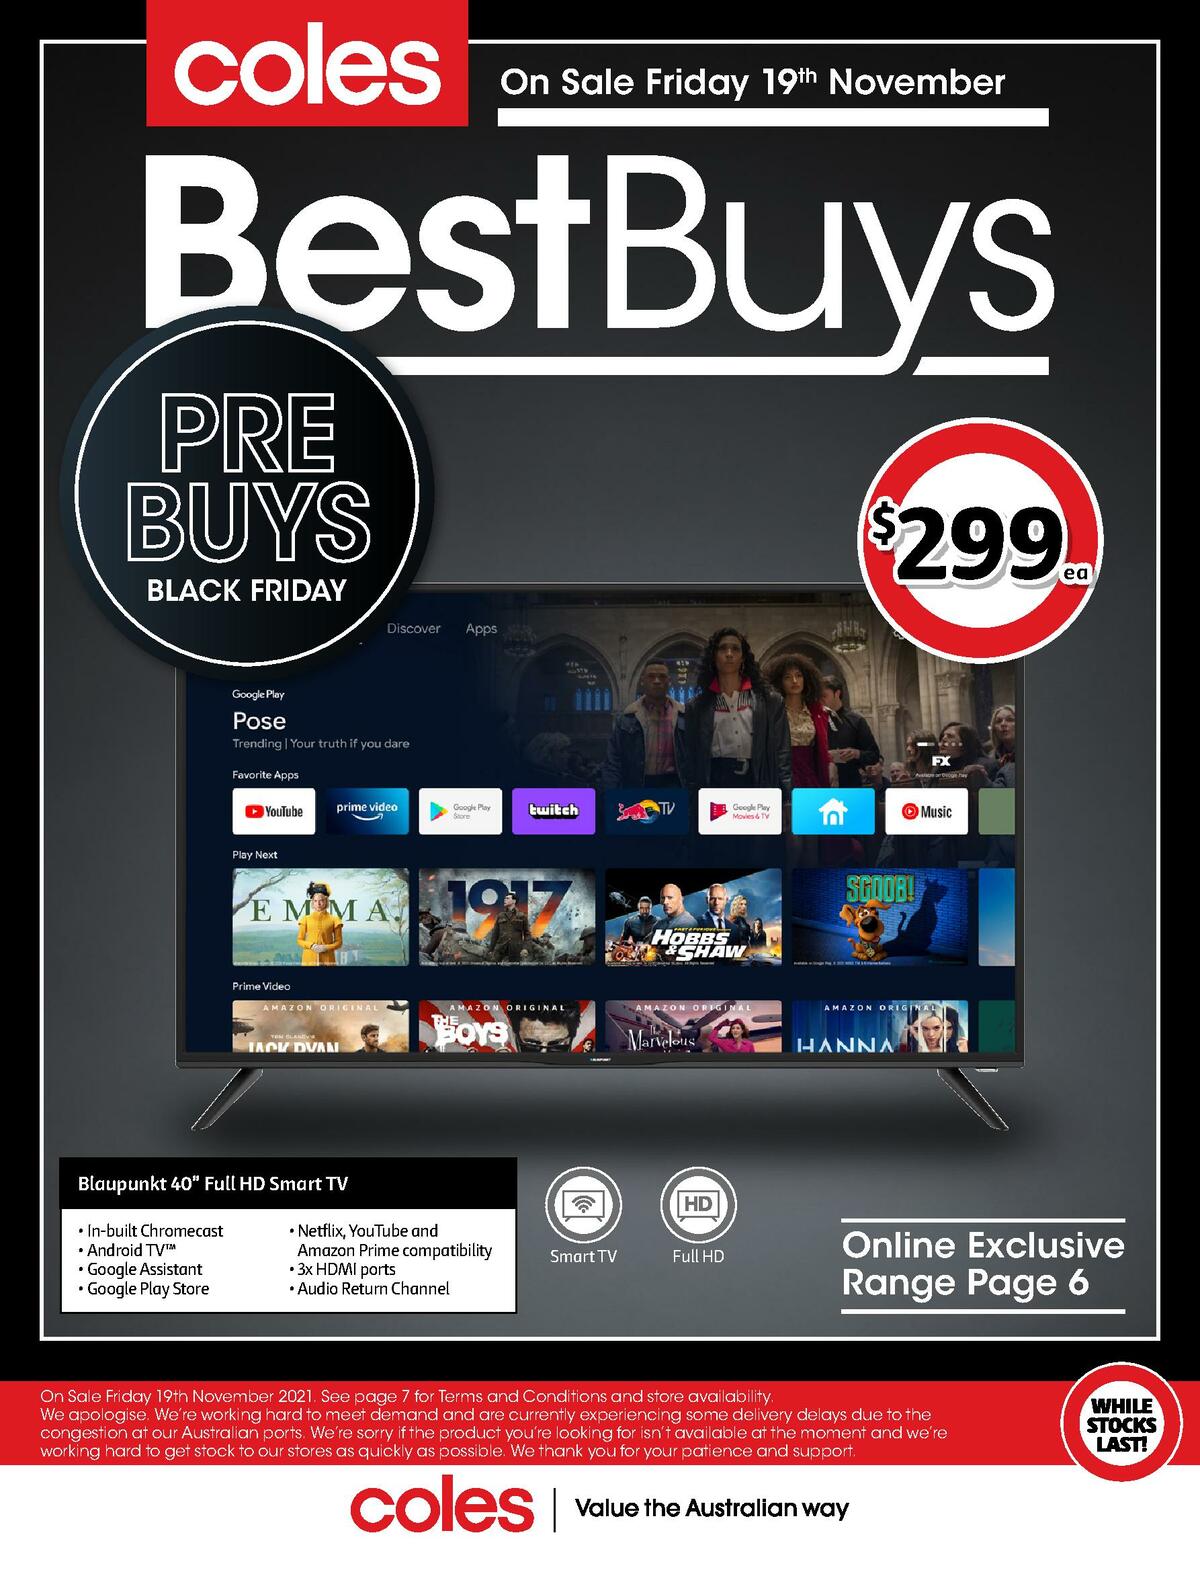 Coles Best Buys - Pre Buys Black Friday Catalogues from 19 November